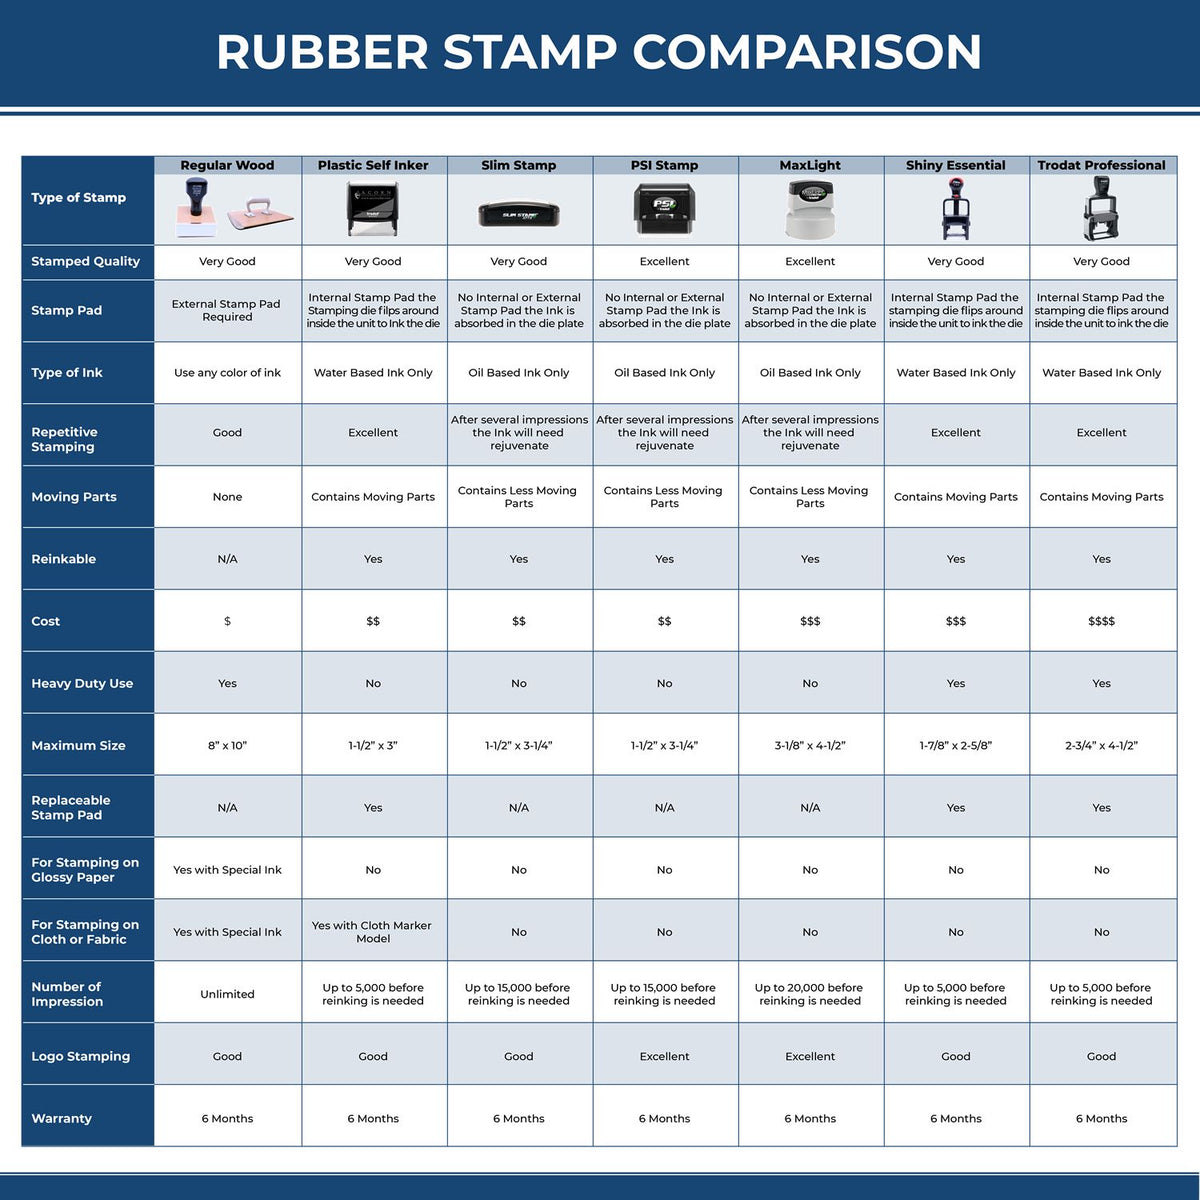 A comparison chart for the different types of mount models available for the Self-Inking Minnesota PE Stamp.